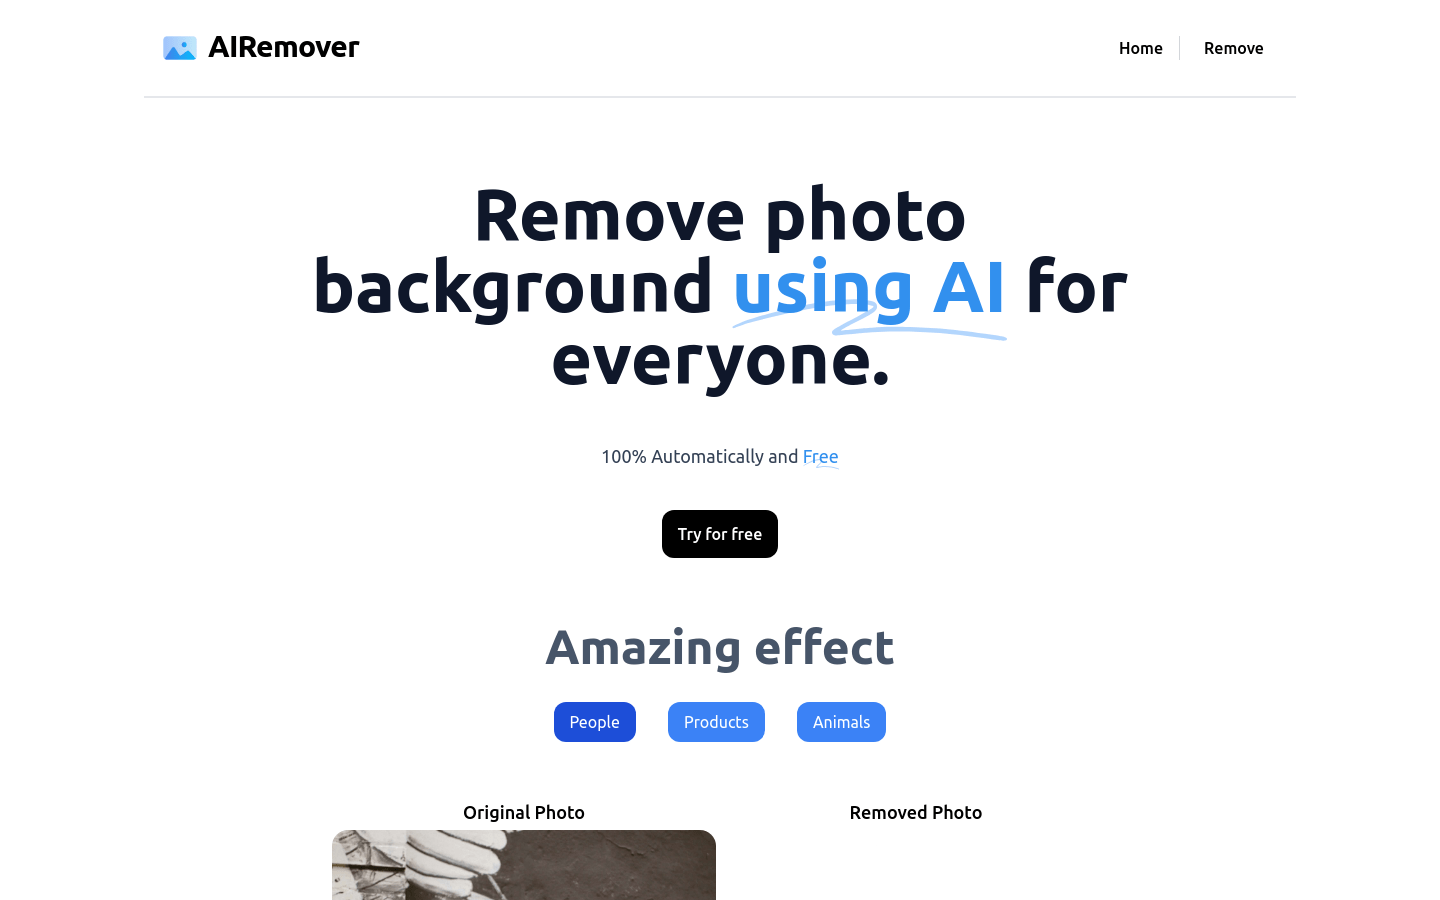 AIRemover